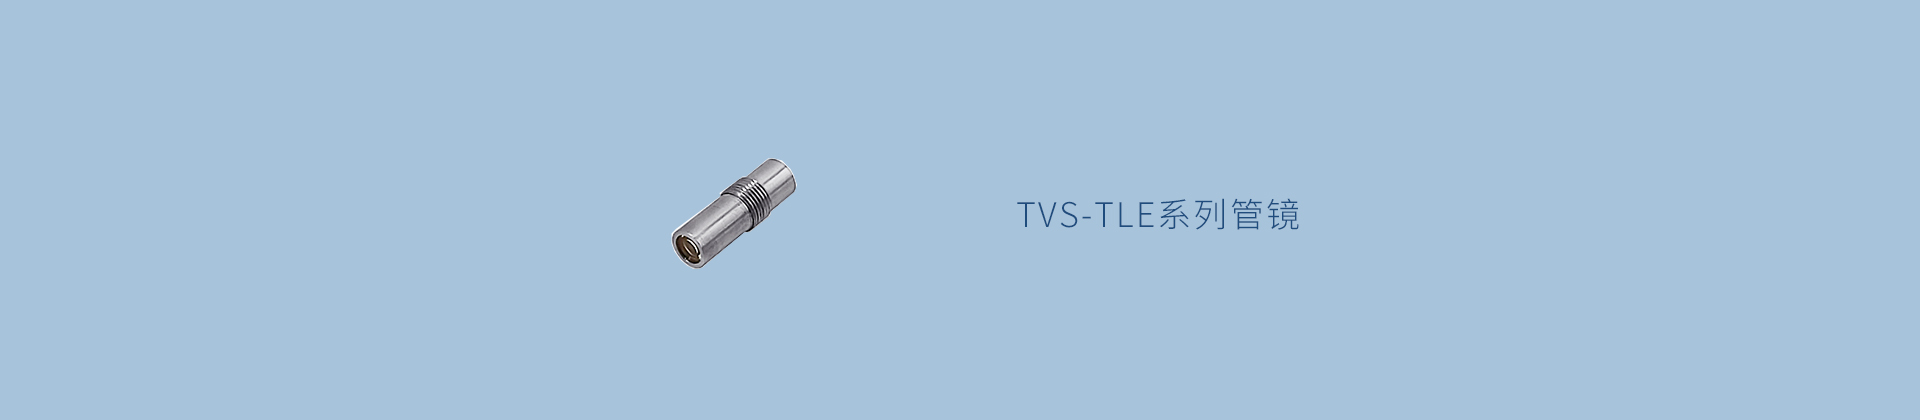 TVS-TLE系列管镜